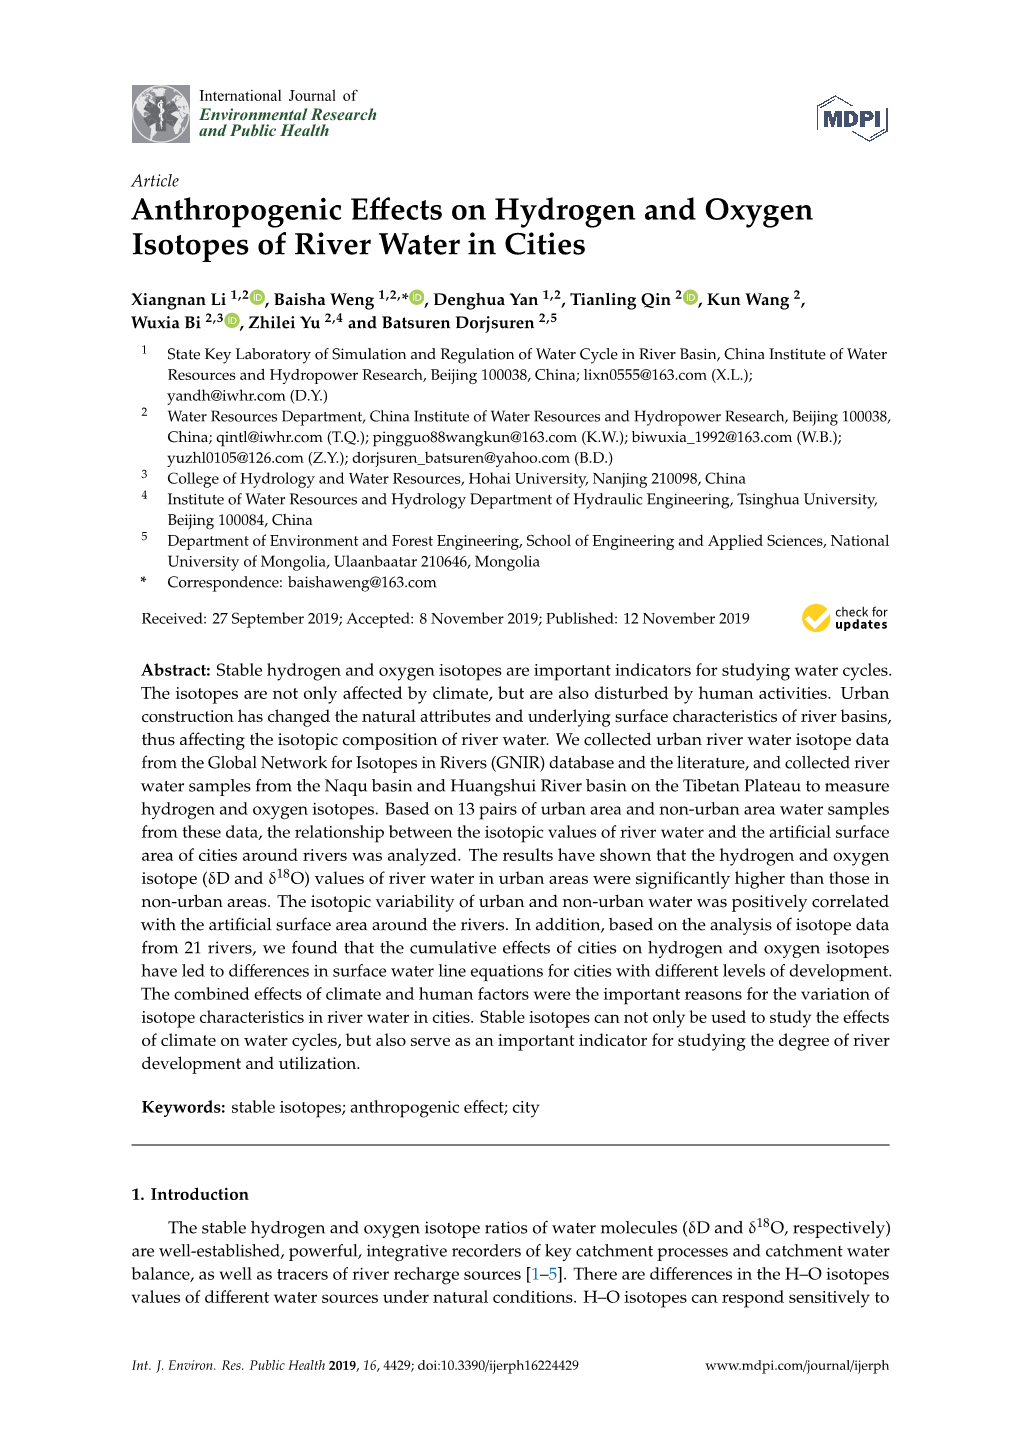 Anthropogenic Effects on Hydrogen and Oxygen Isotopes of River Water